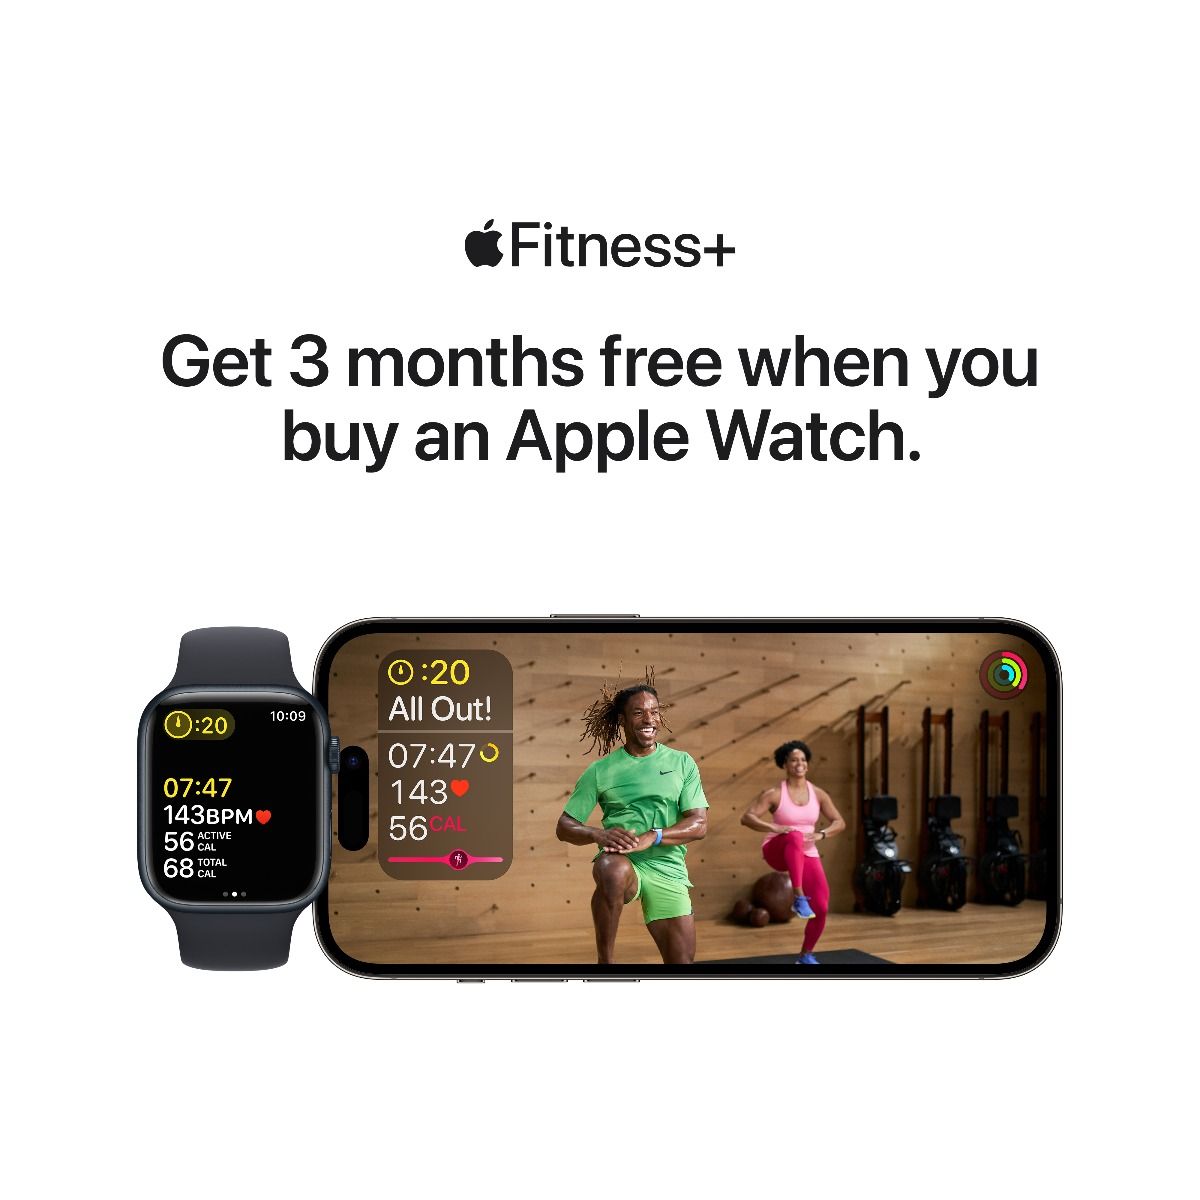 Get 3 months free when you buy an apple watch